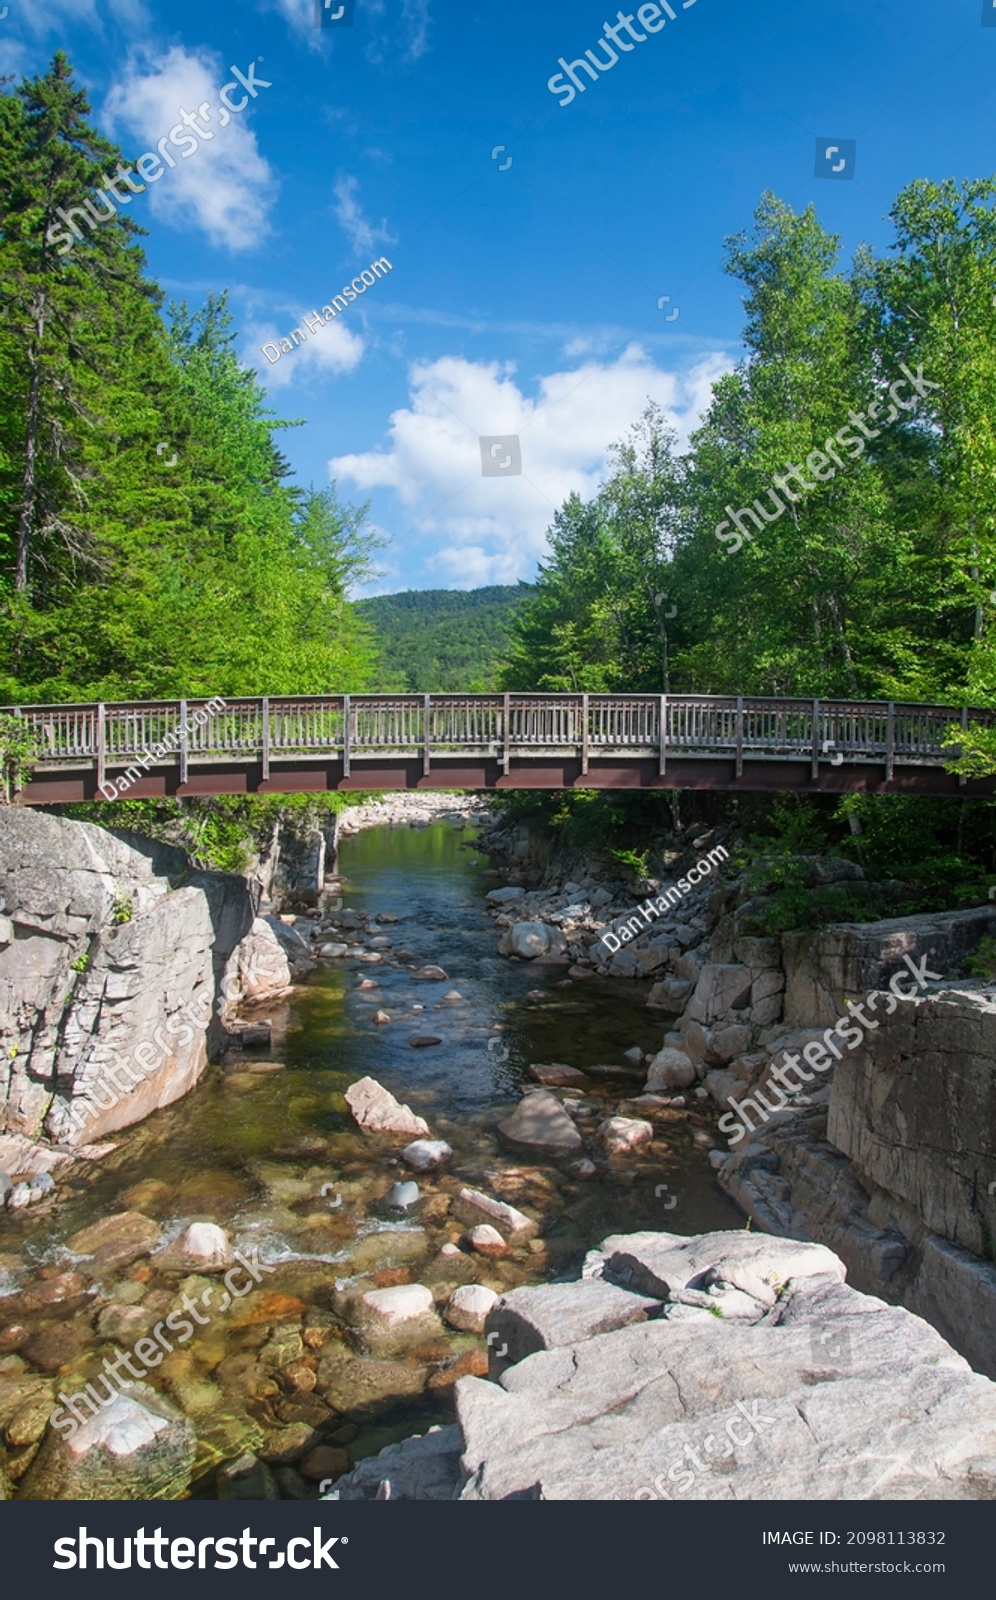 The rocky gorge scenic area on kancamagus Highway on the swift river in Albany new hampshire on a sunny day. #2098113832